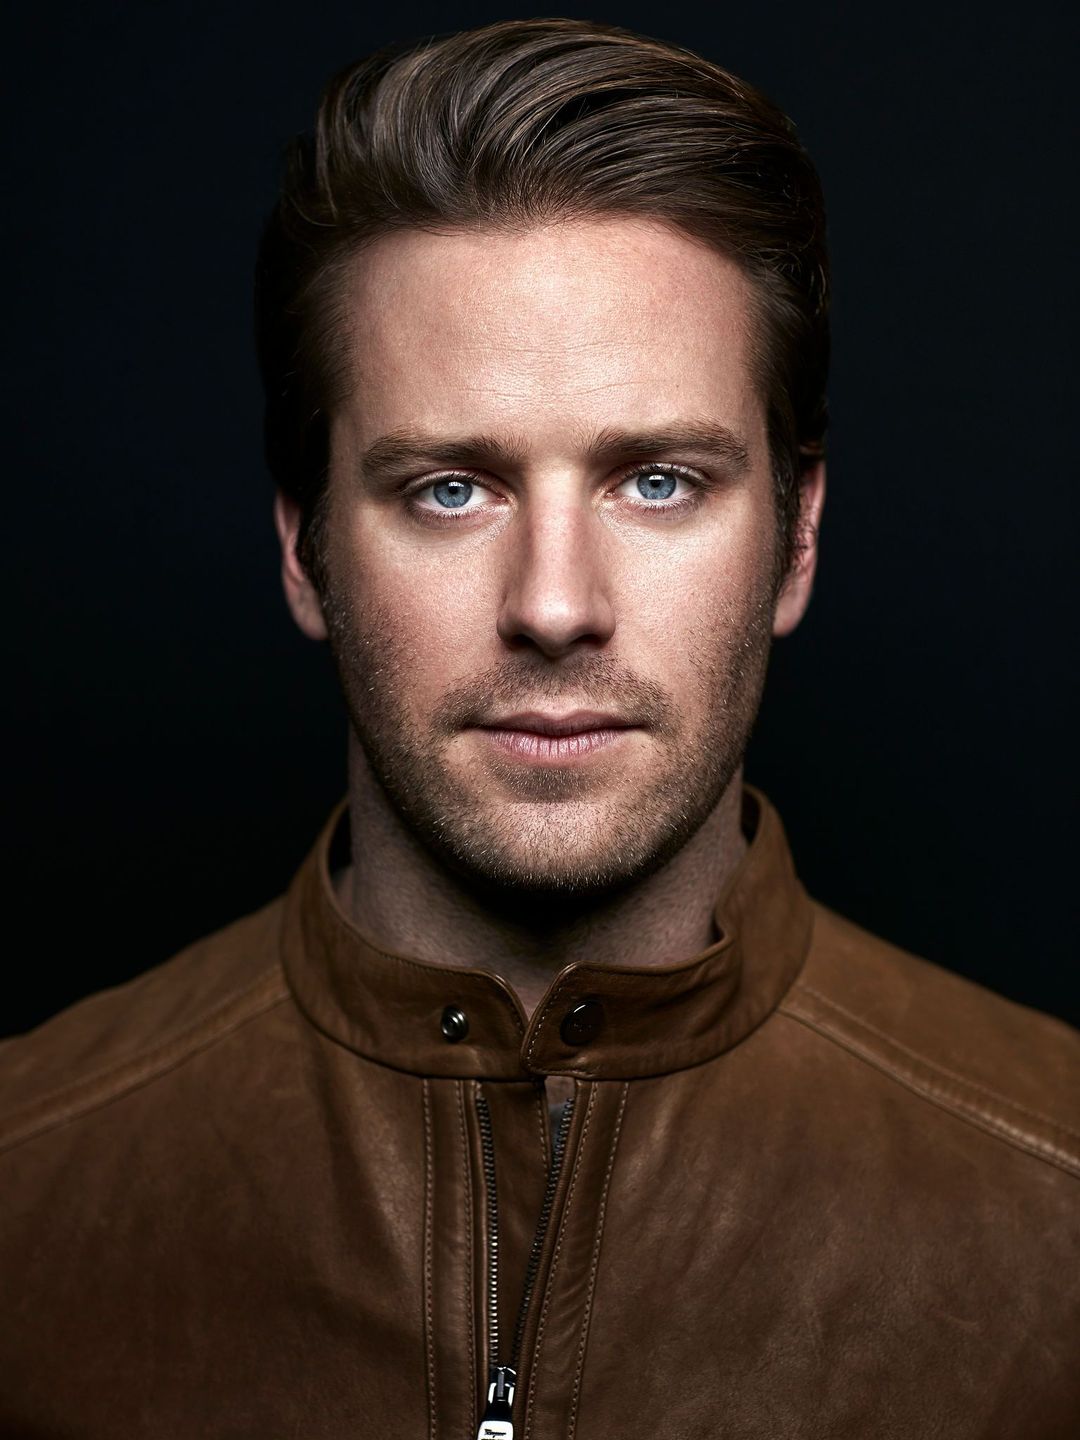 Armie Hammer story of success